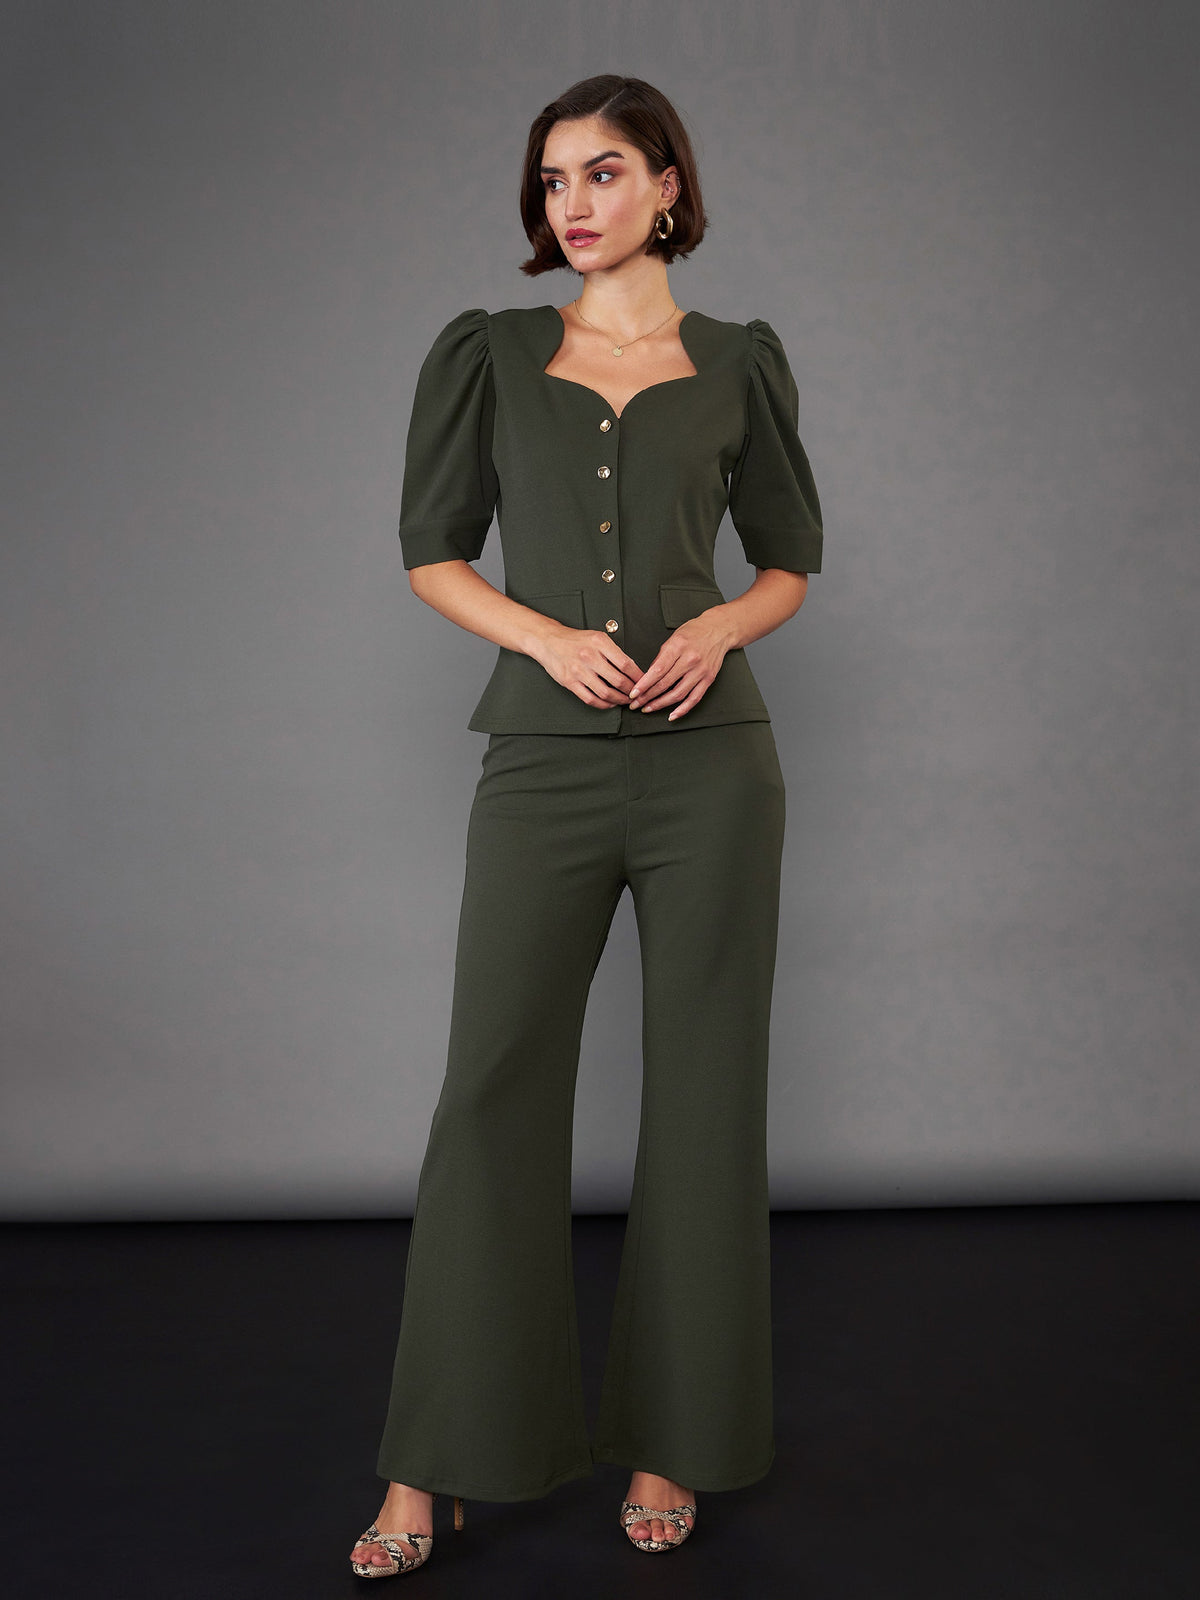 Olive Puff Sleeves Top With Bell Bottom Pants-SASSAFRAS worklyf